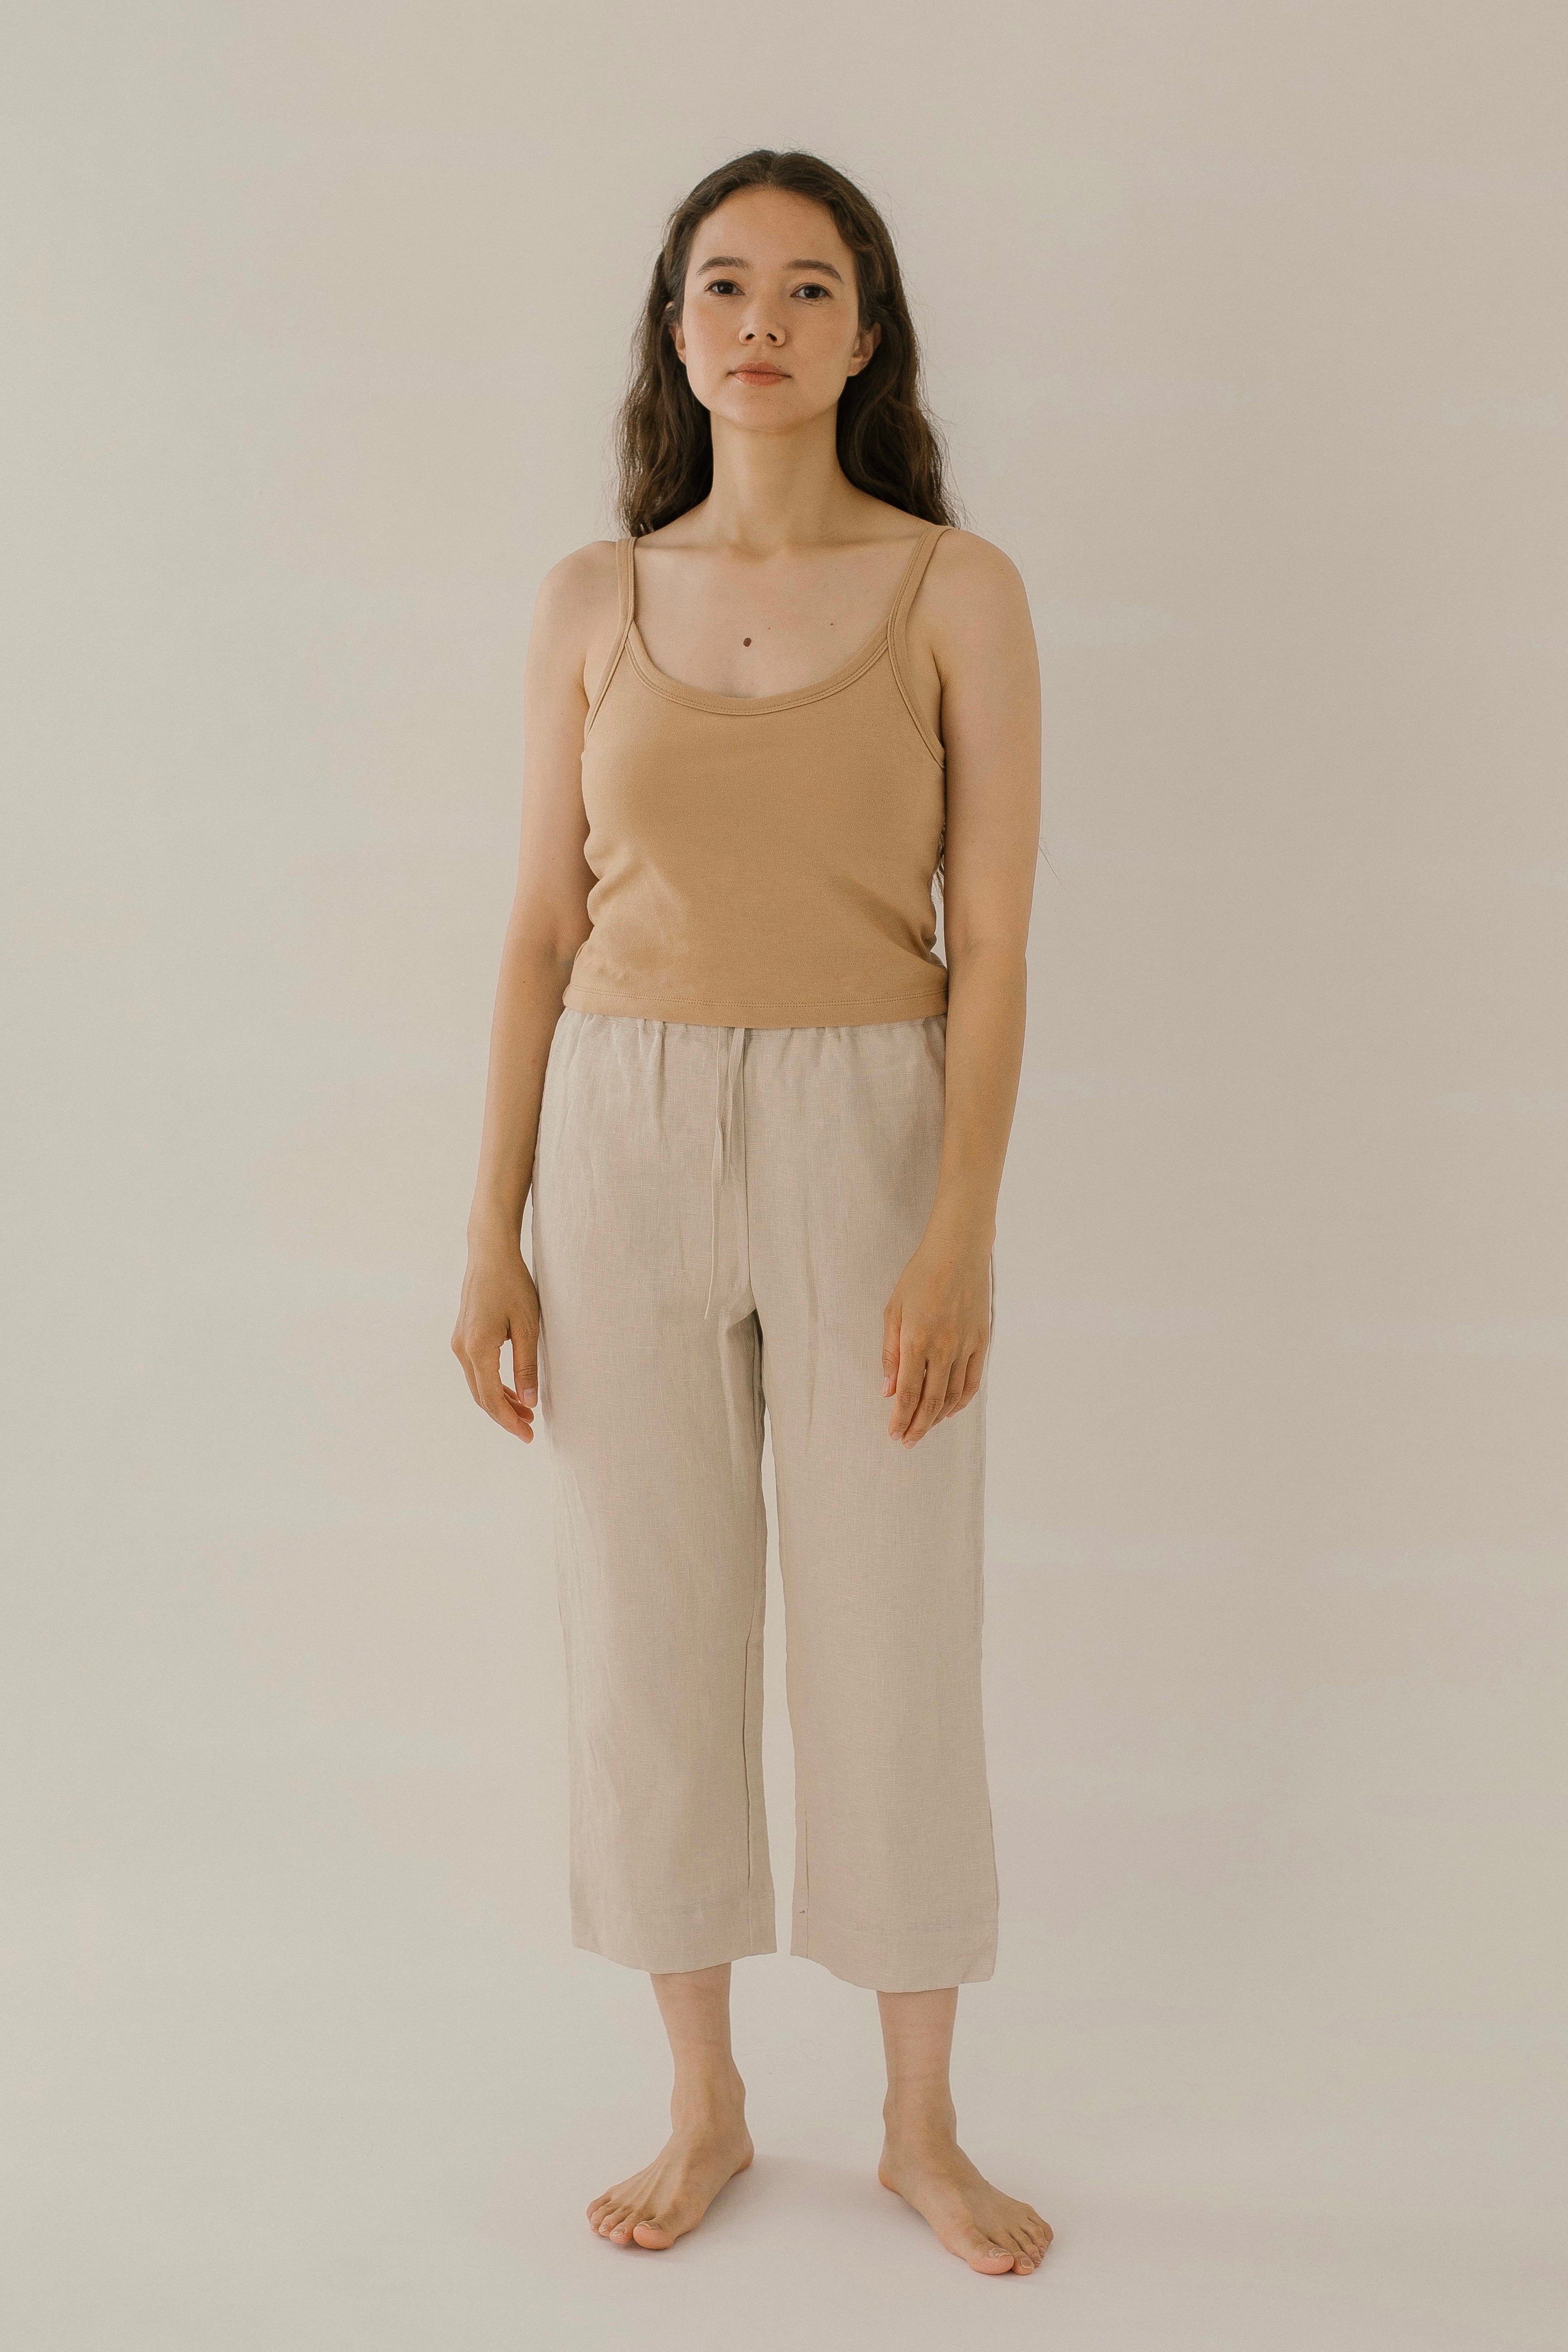 100% Organic Linen Pants[Picked from QUINCE] Relaxed and lightweight, these  linen pants are equally perfect for lou…